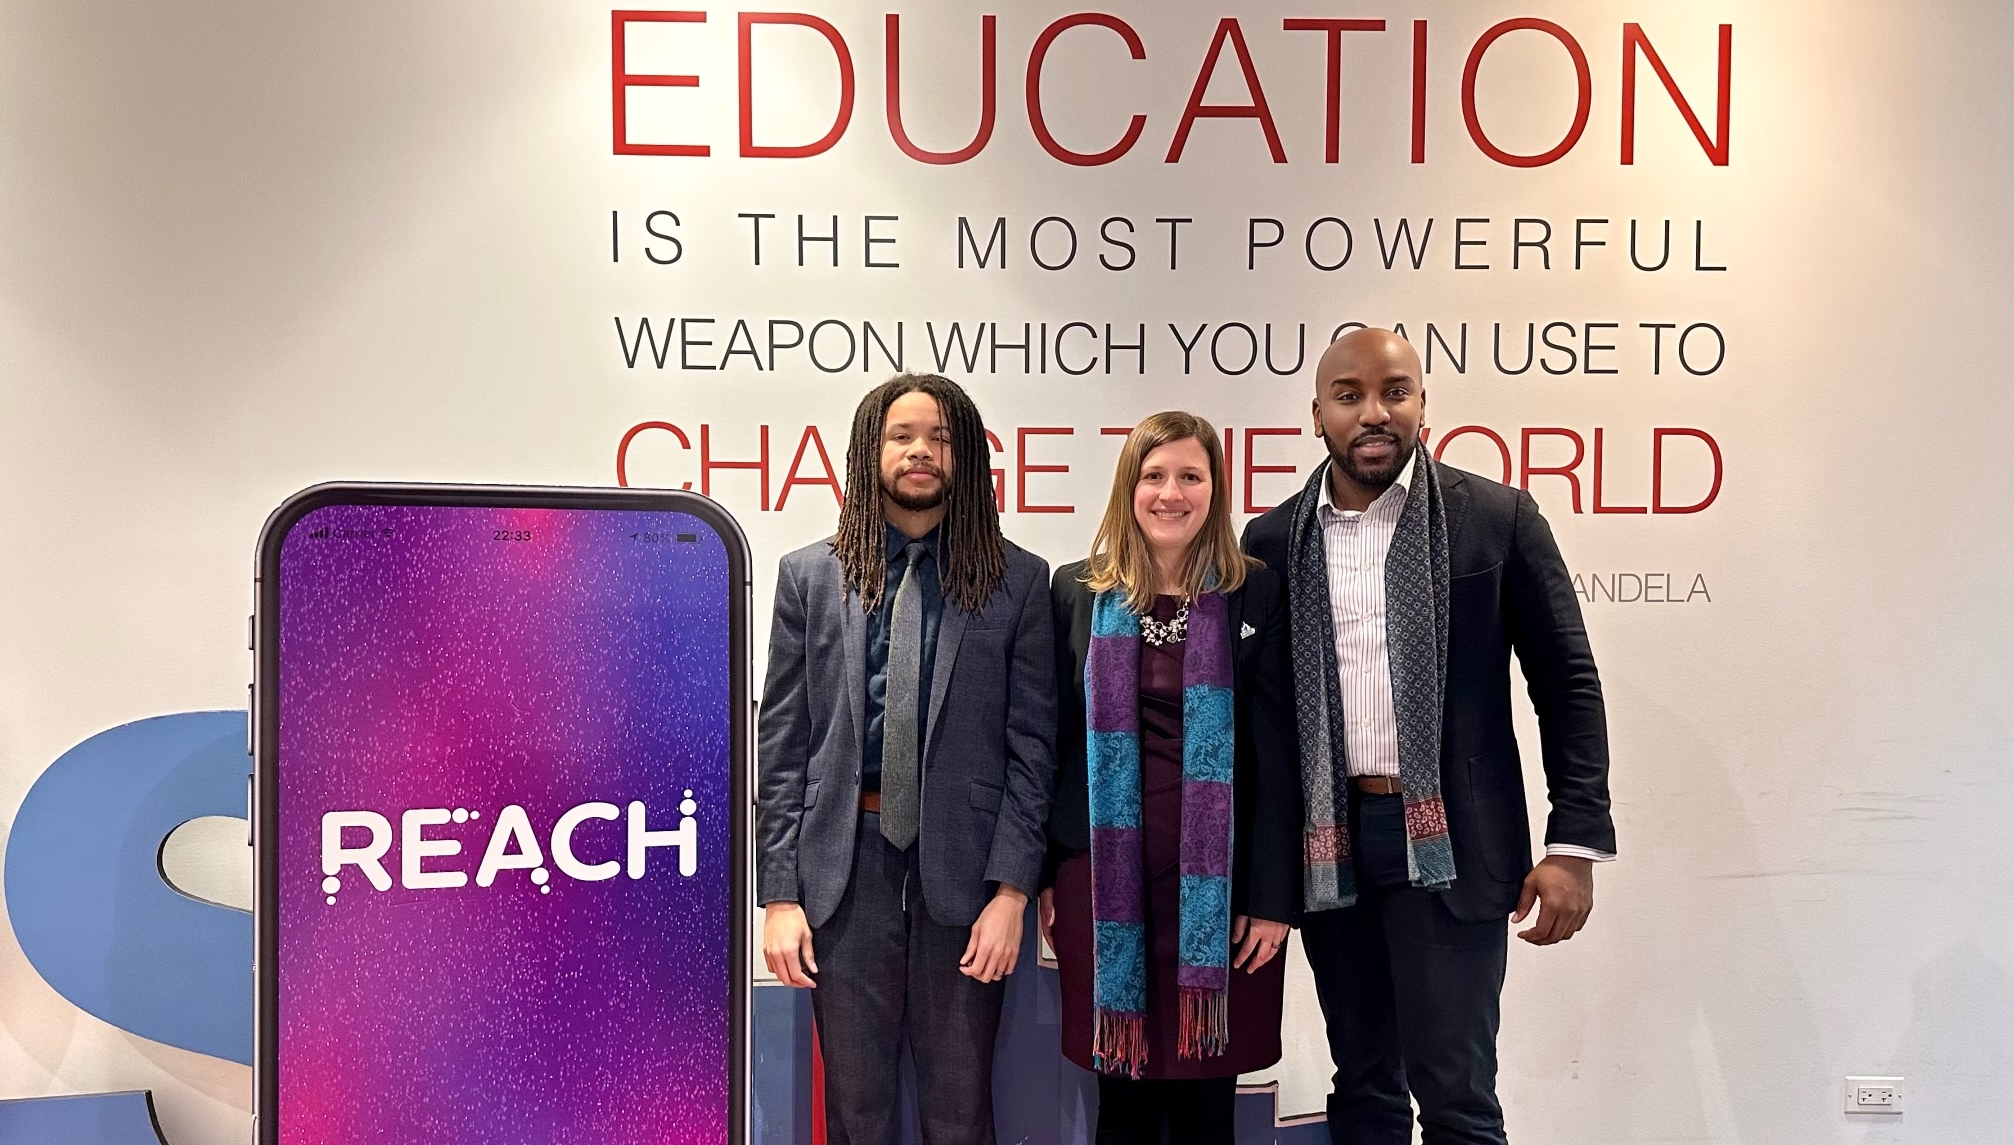 The Reach Pathways founding team poses together for a photo next to a large mobile phone displaying the REACH app